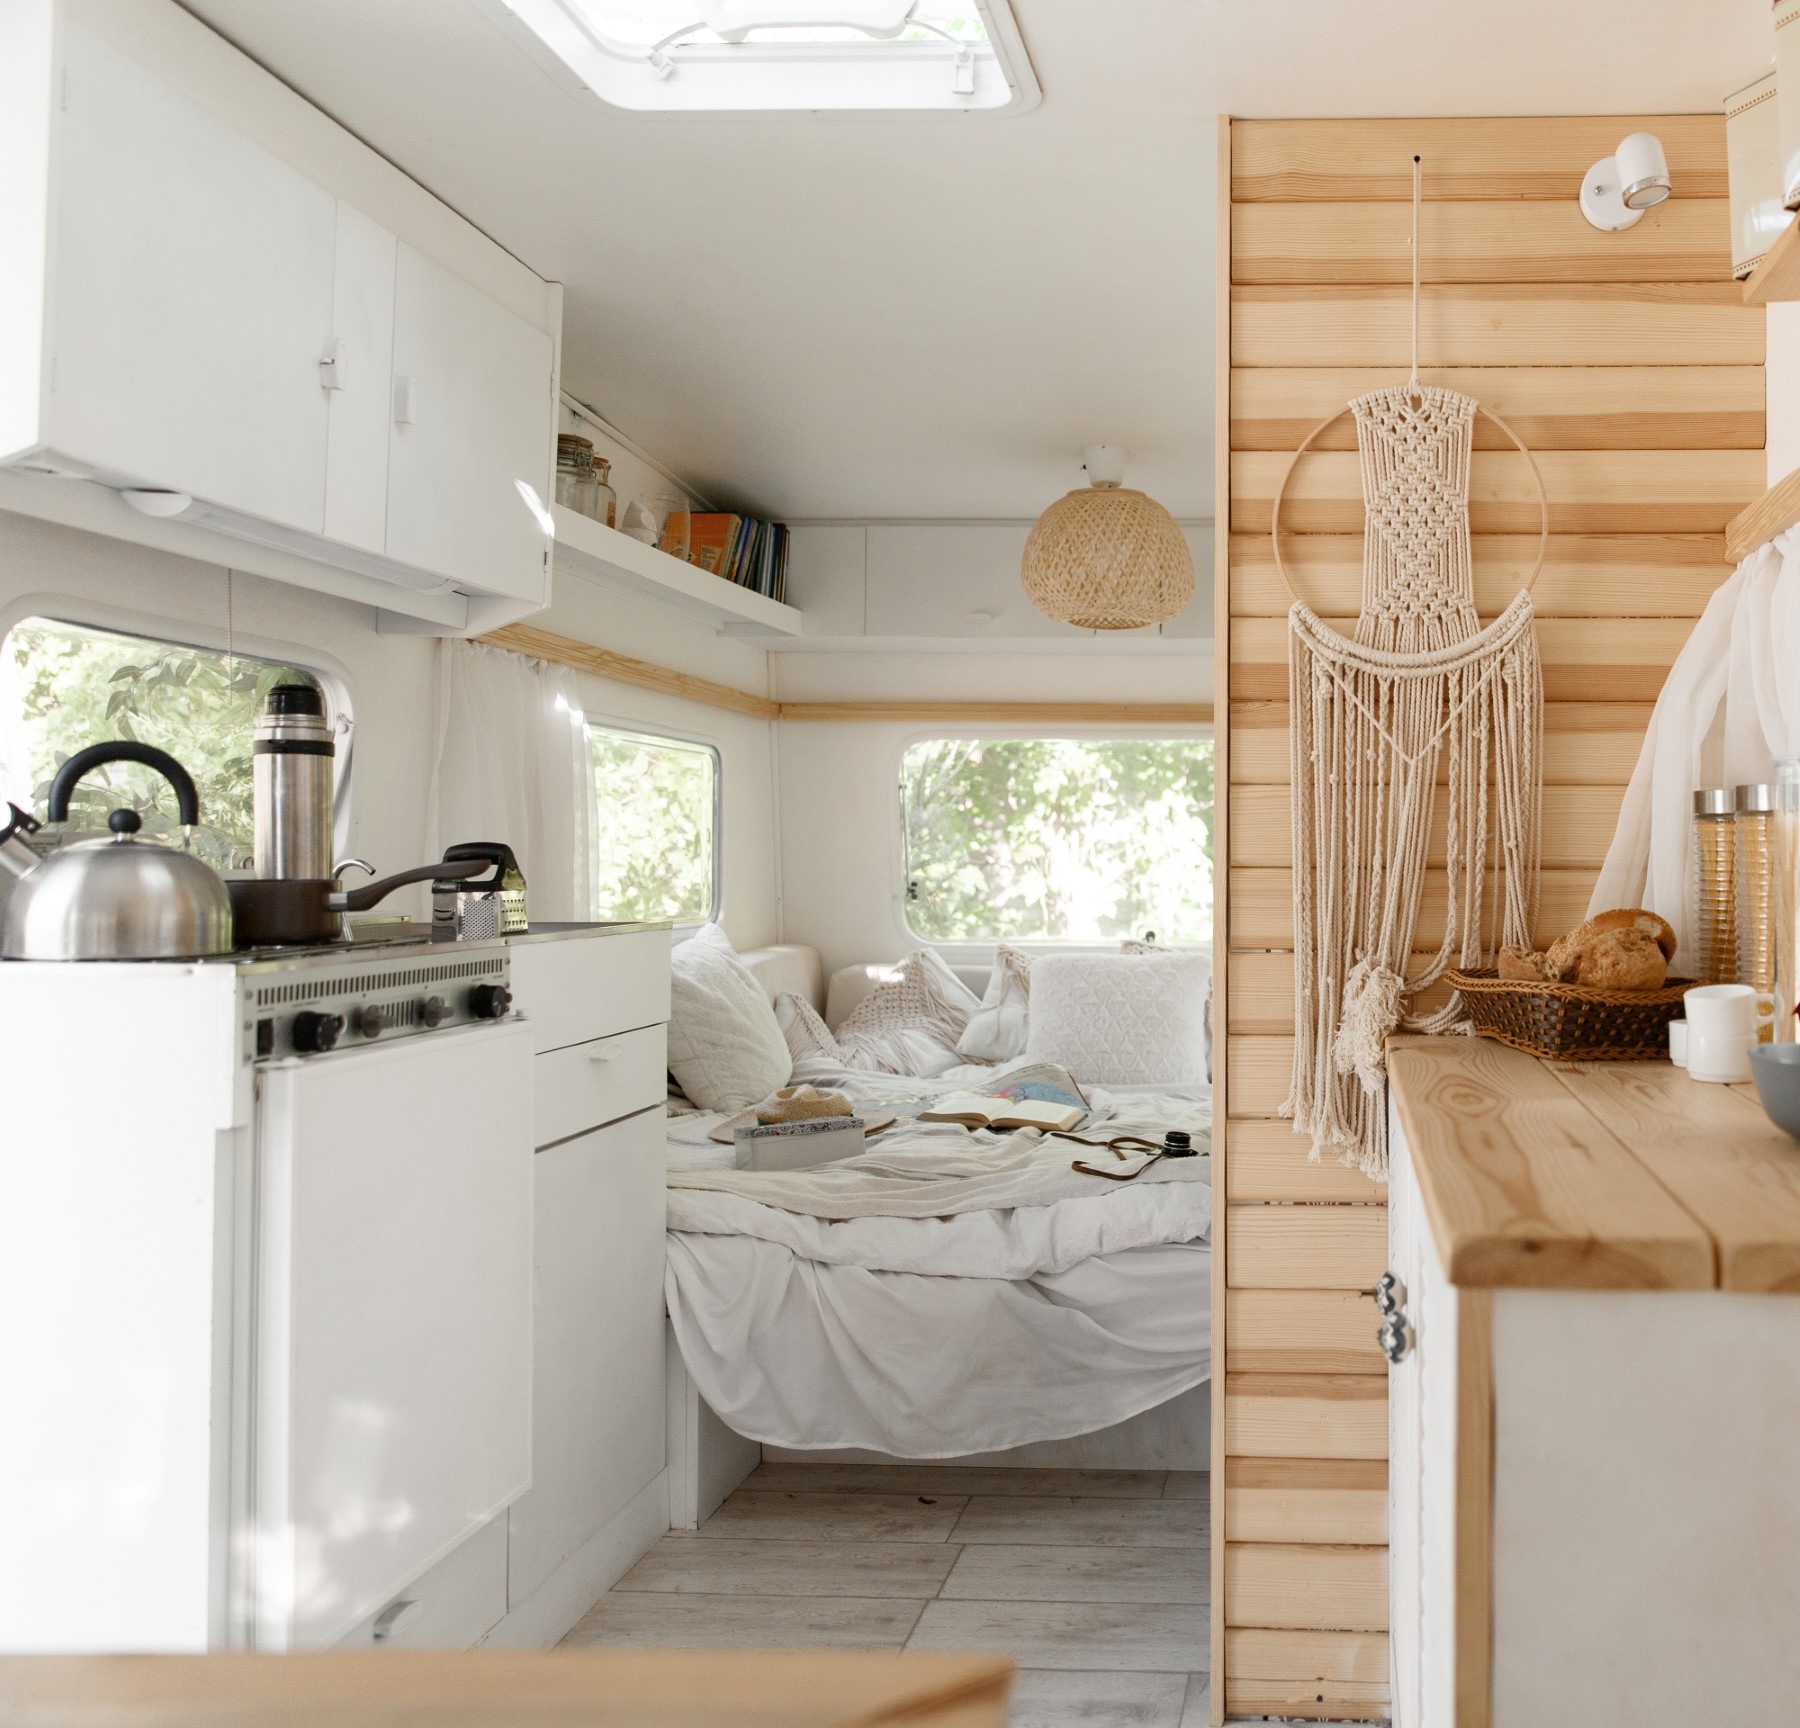 Featured Image for 7 Caravan Renovation Ideas to Transform Your Travels